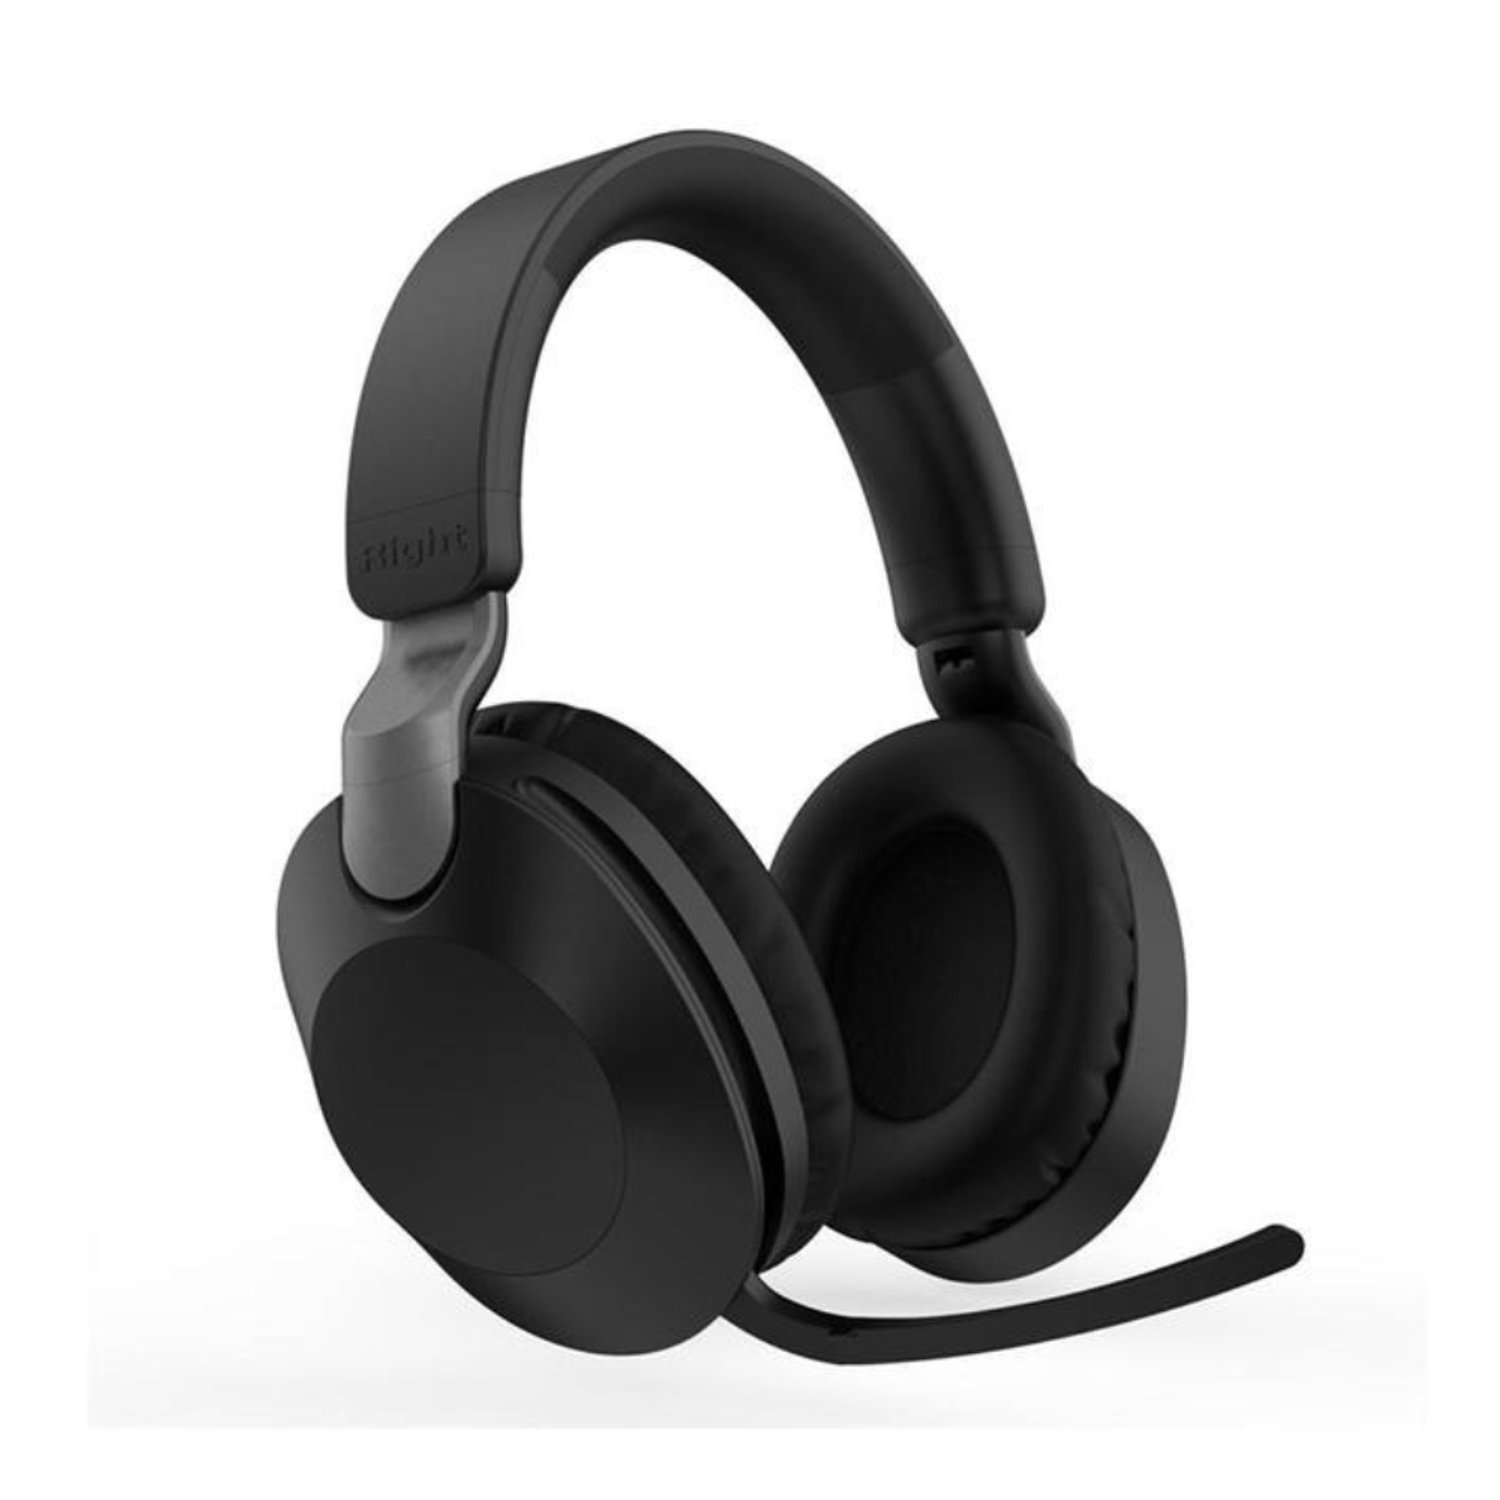 Auriculares Inalambricos Bluetooth Microfono Weiss 50 hrs Duración I  Oechsle - Oechsle